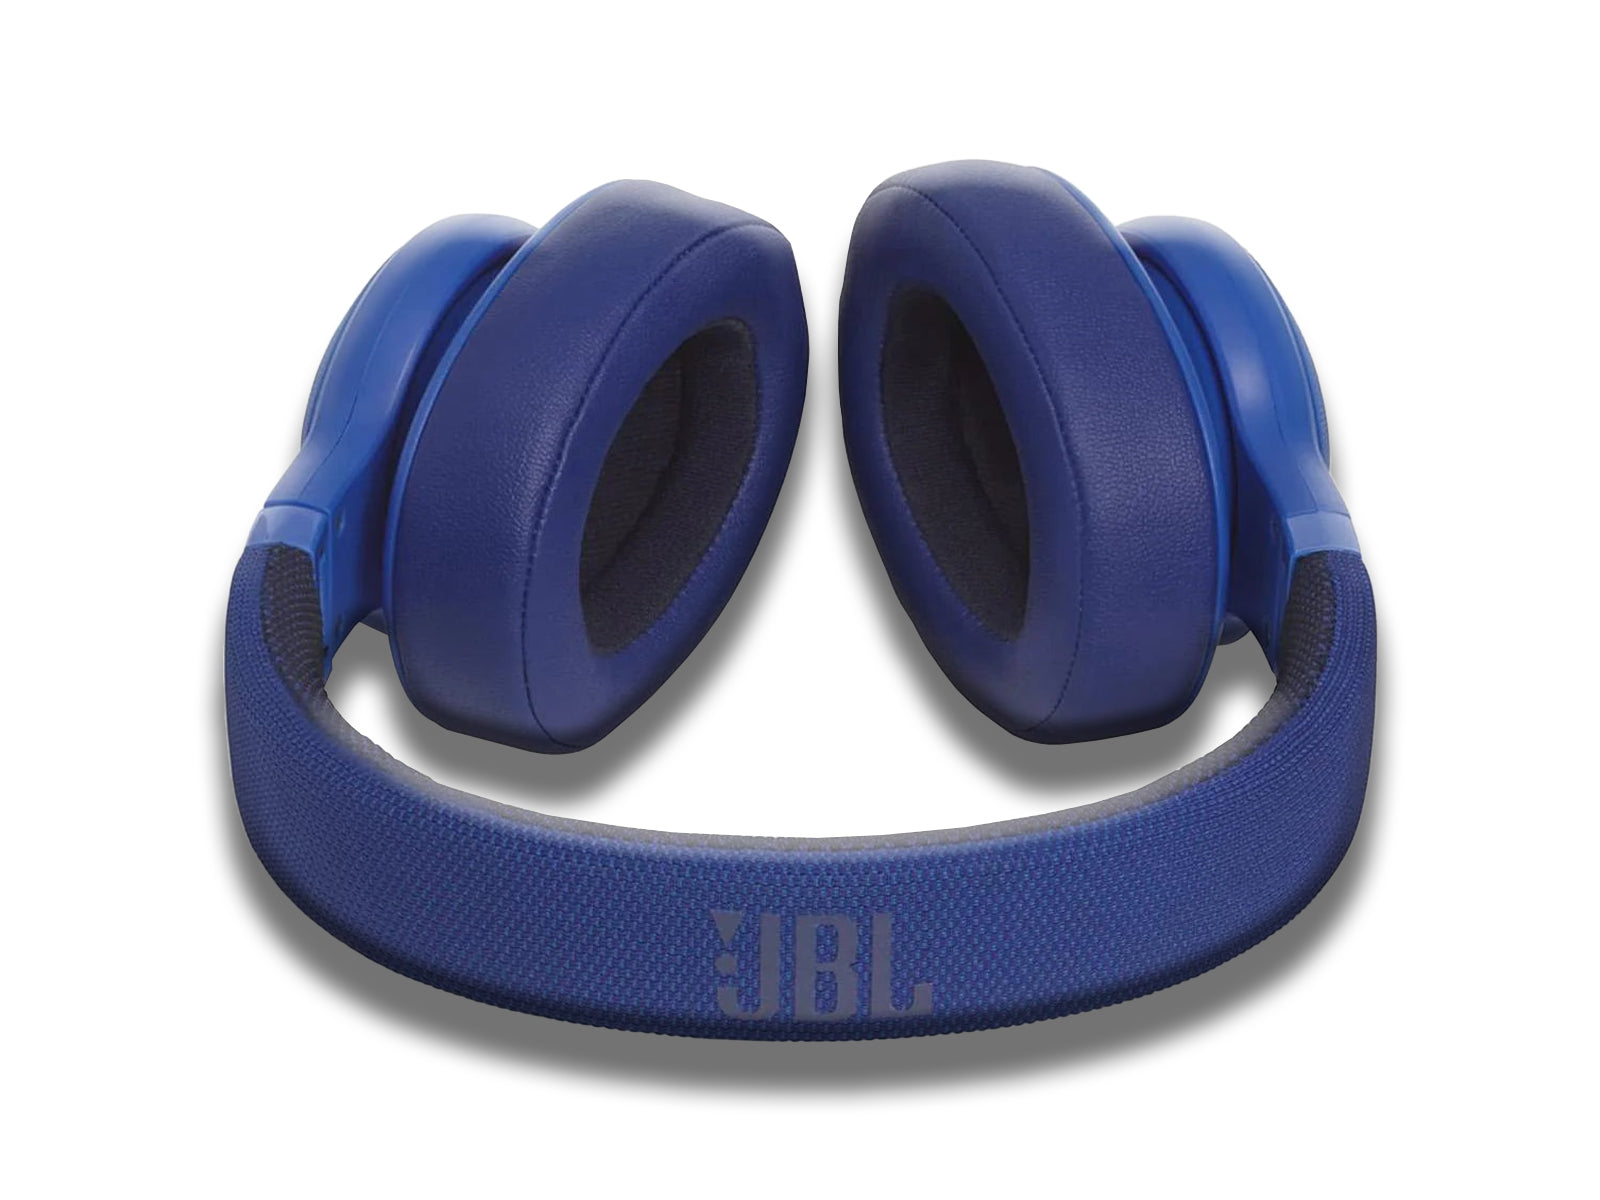 The-picture-of-the-Bluetooth-Wireless-Headphones-Over-Ear-Ergonomic-Design-_Sound-Control-_JBL_-on-the-white-background